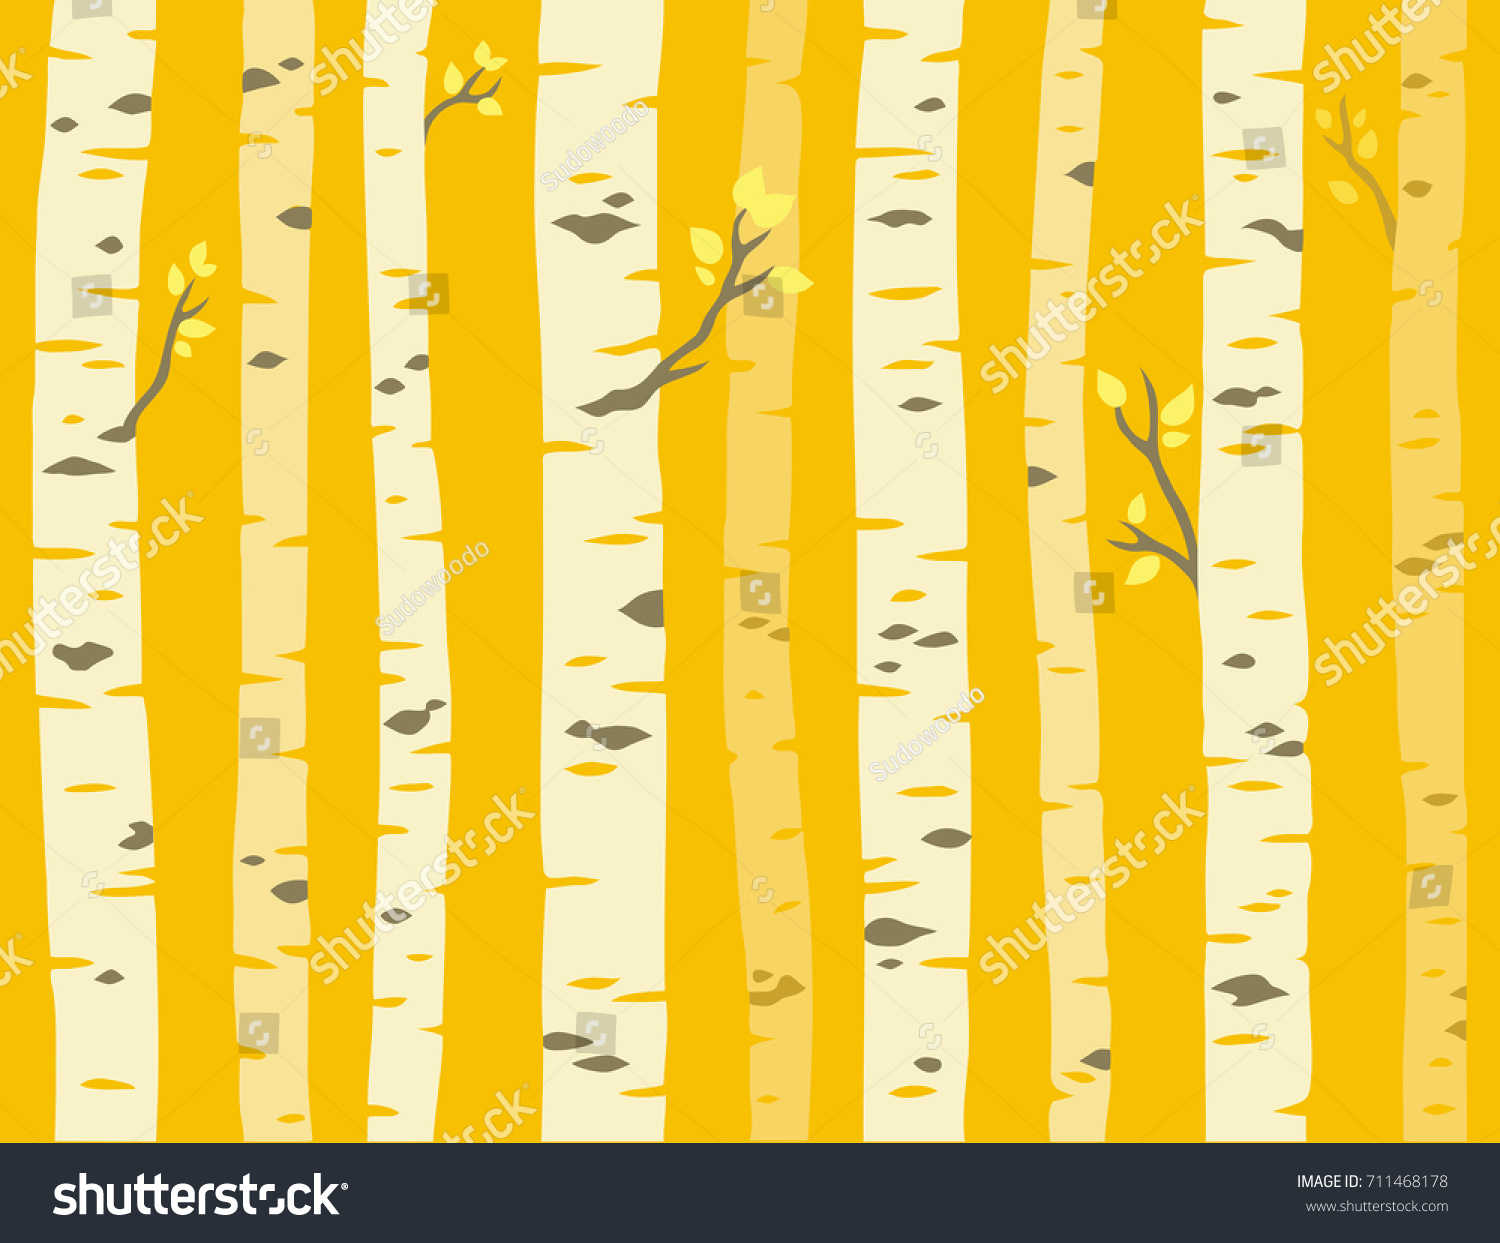 SVG of Autumn aspen grove, seamless tileable background pattern. Birch or aspen trees with yellow leaves. Vector illustration. svg